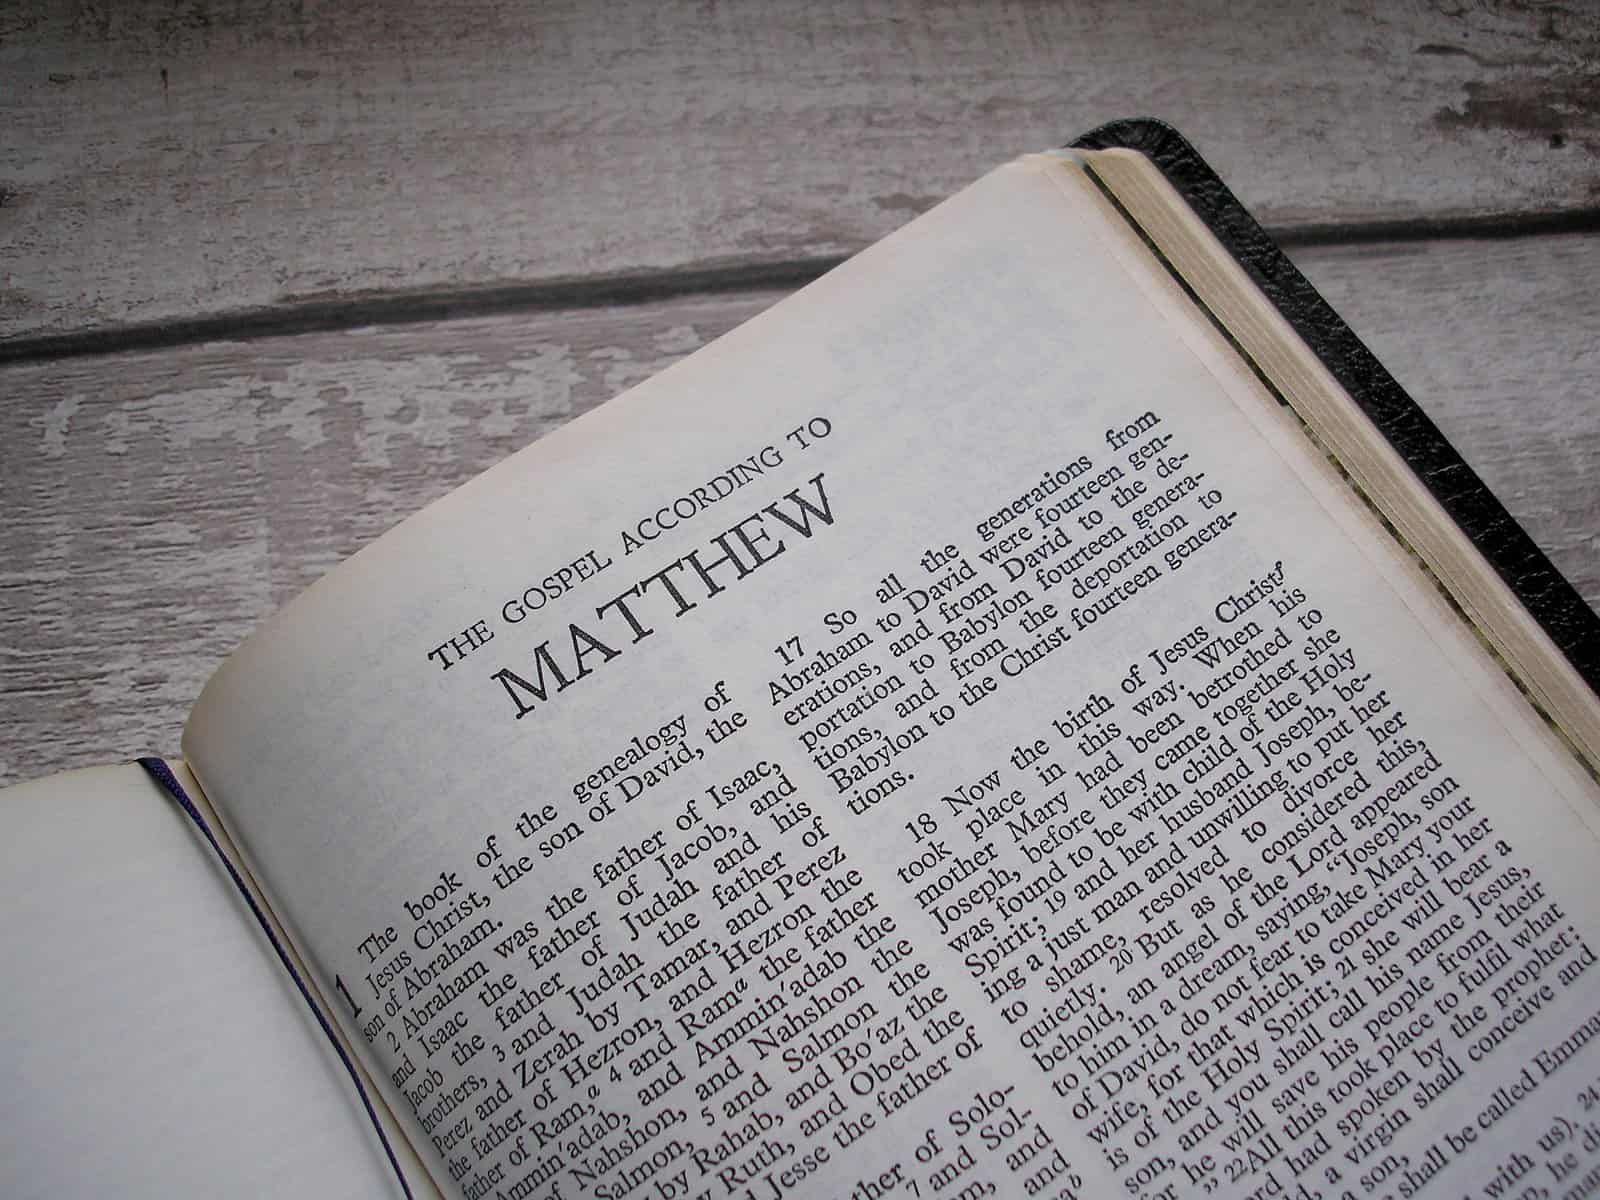 A bible is shown open to the first page of Matthew.